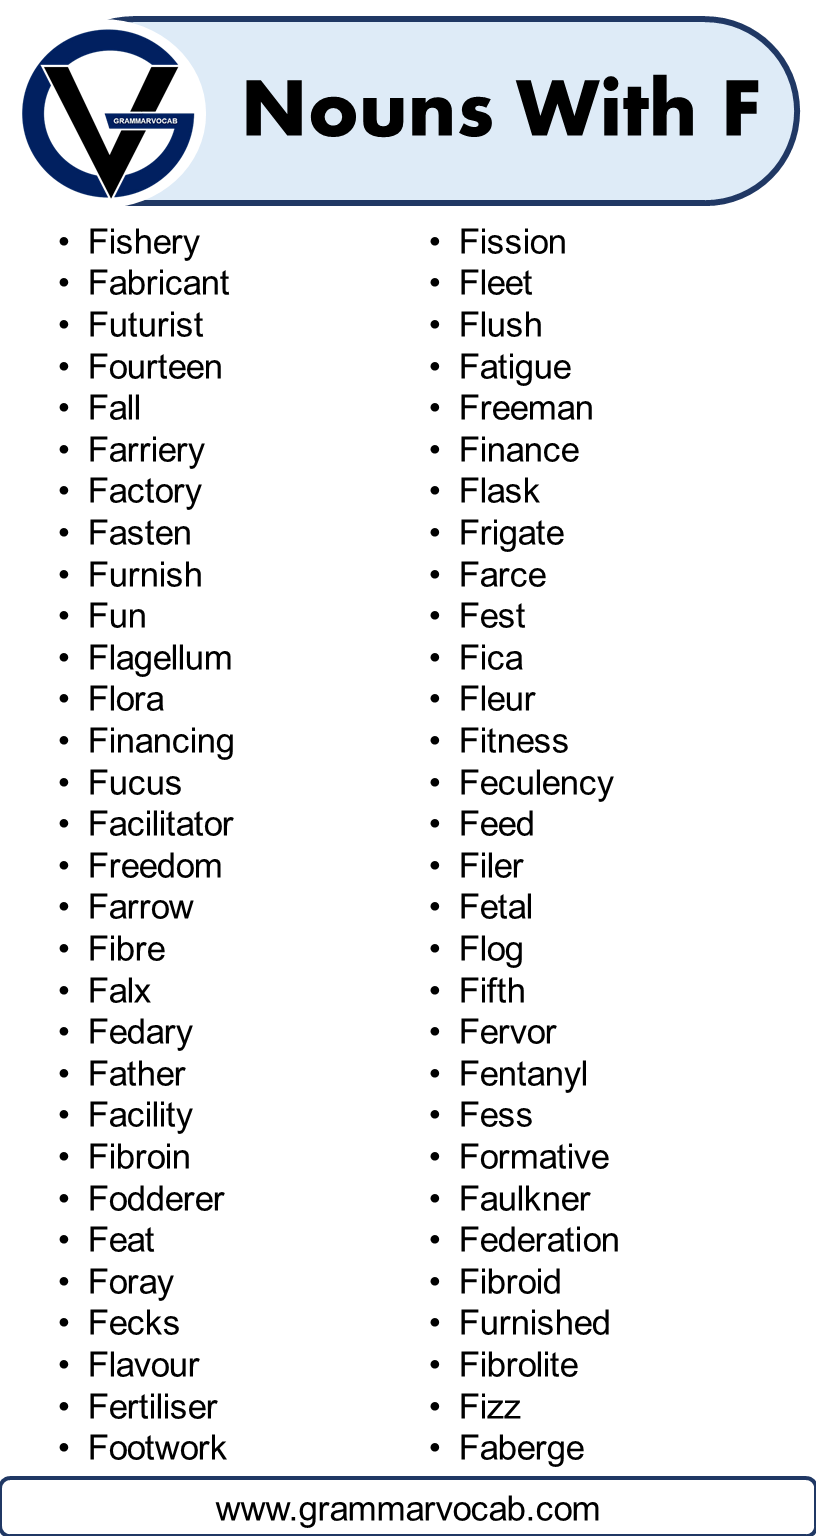 Nouns That Start With F